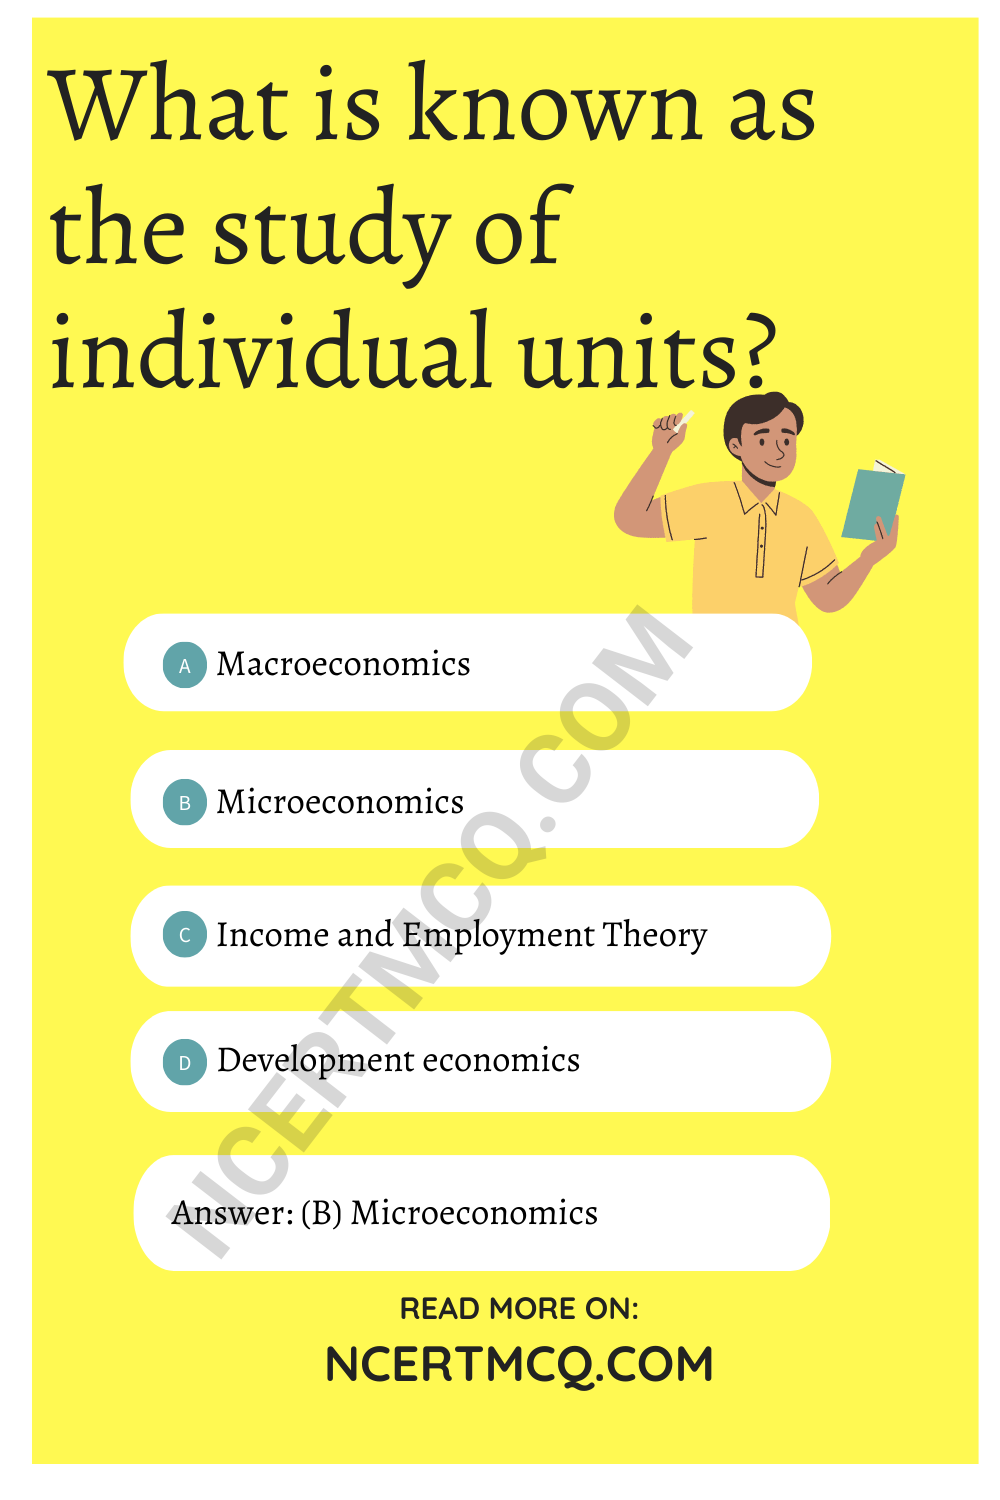 What is known as the study of individual units?